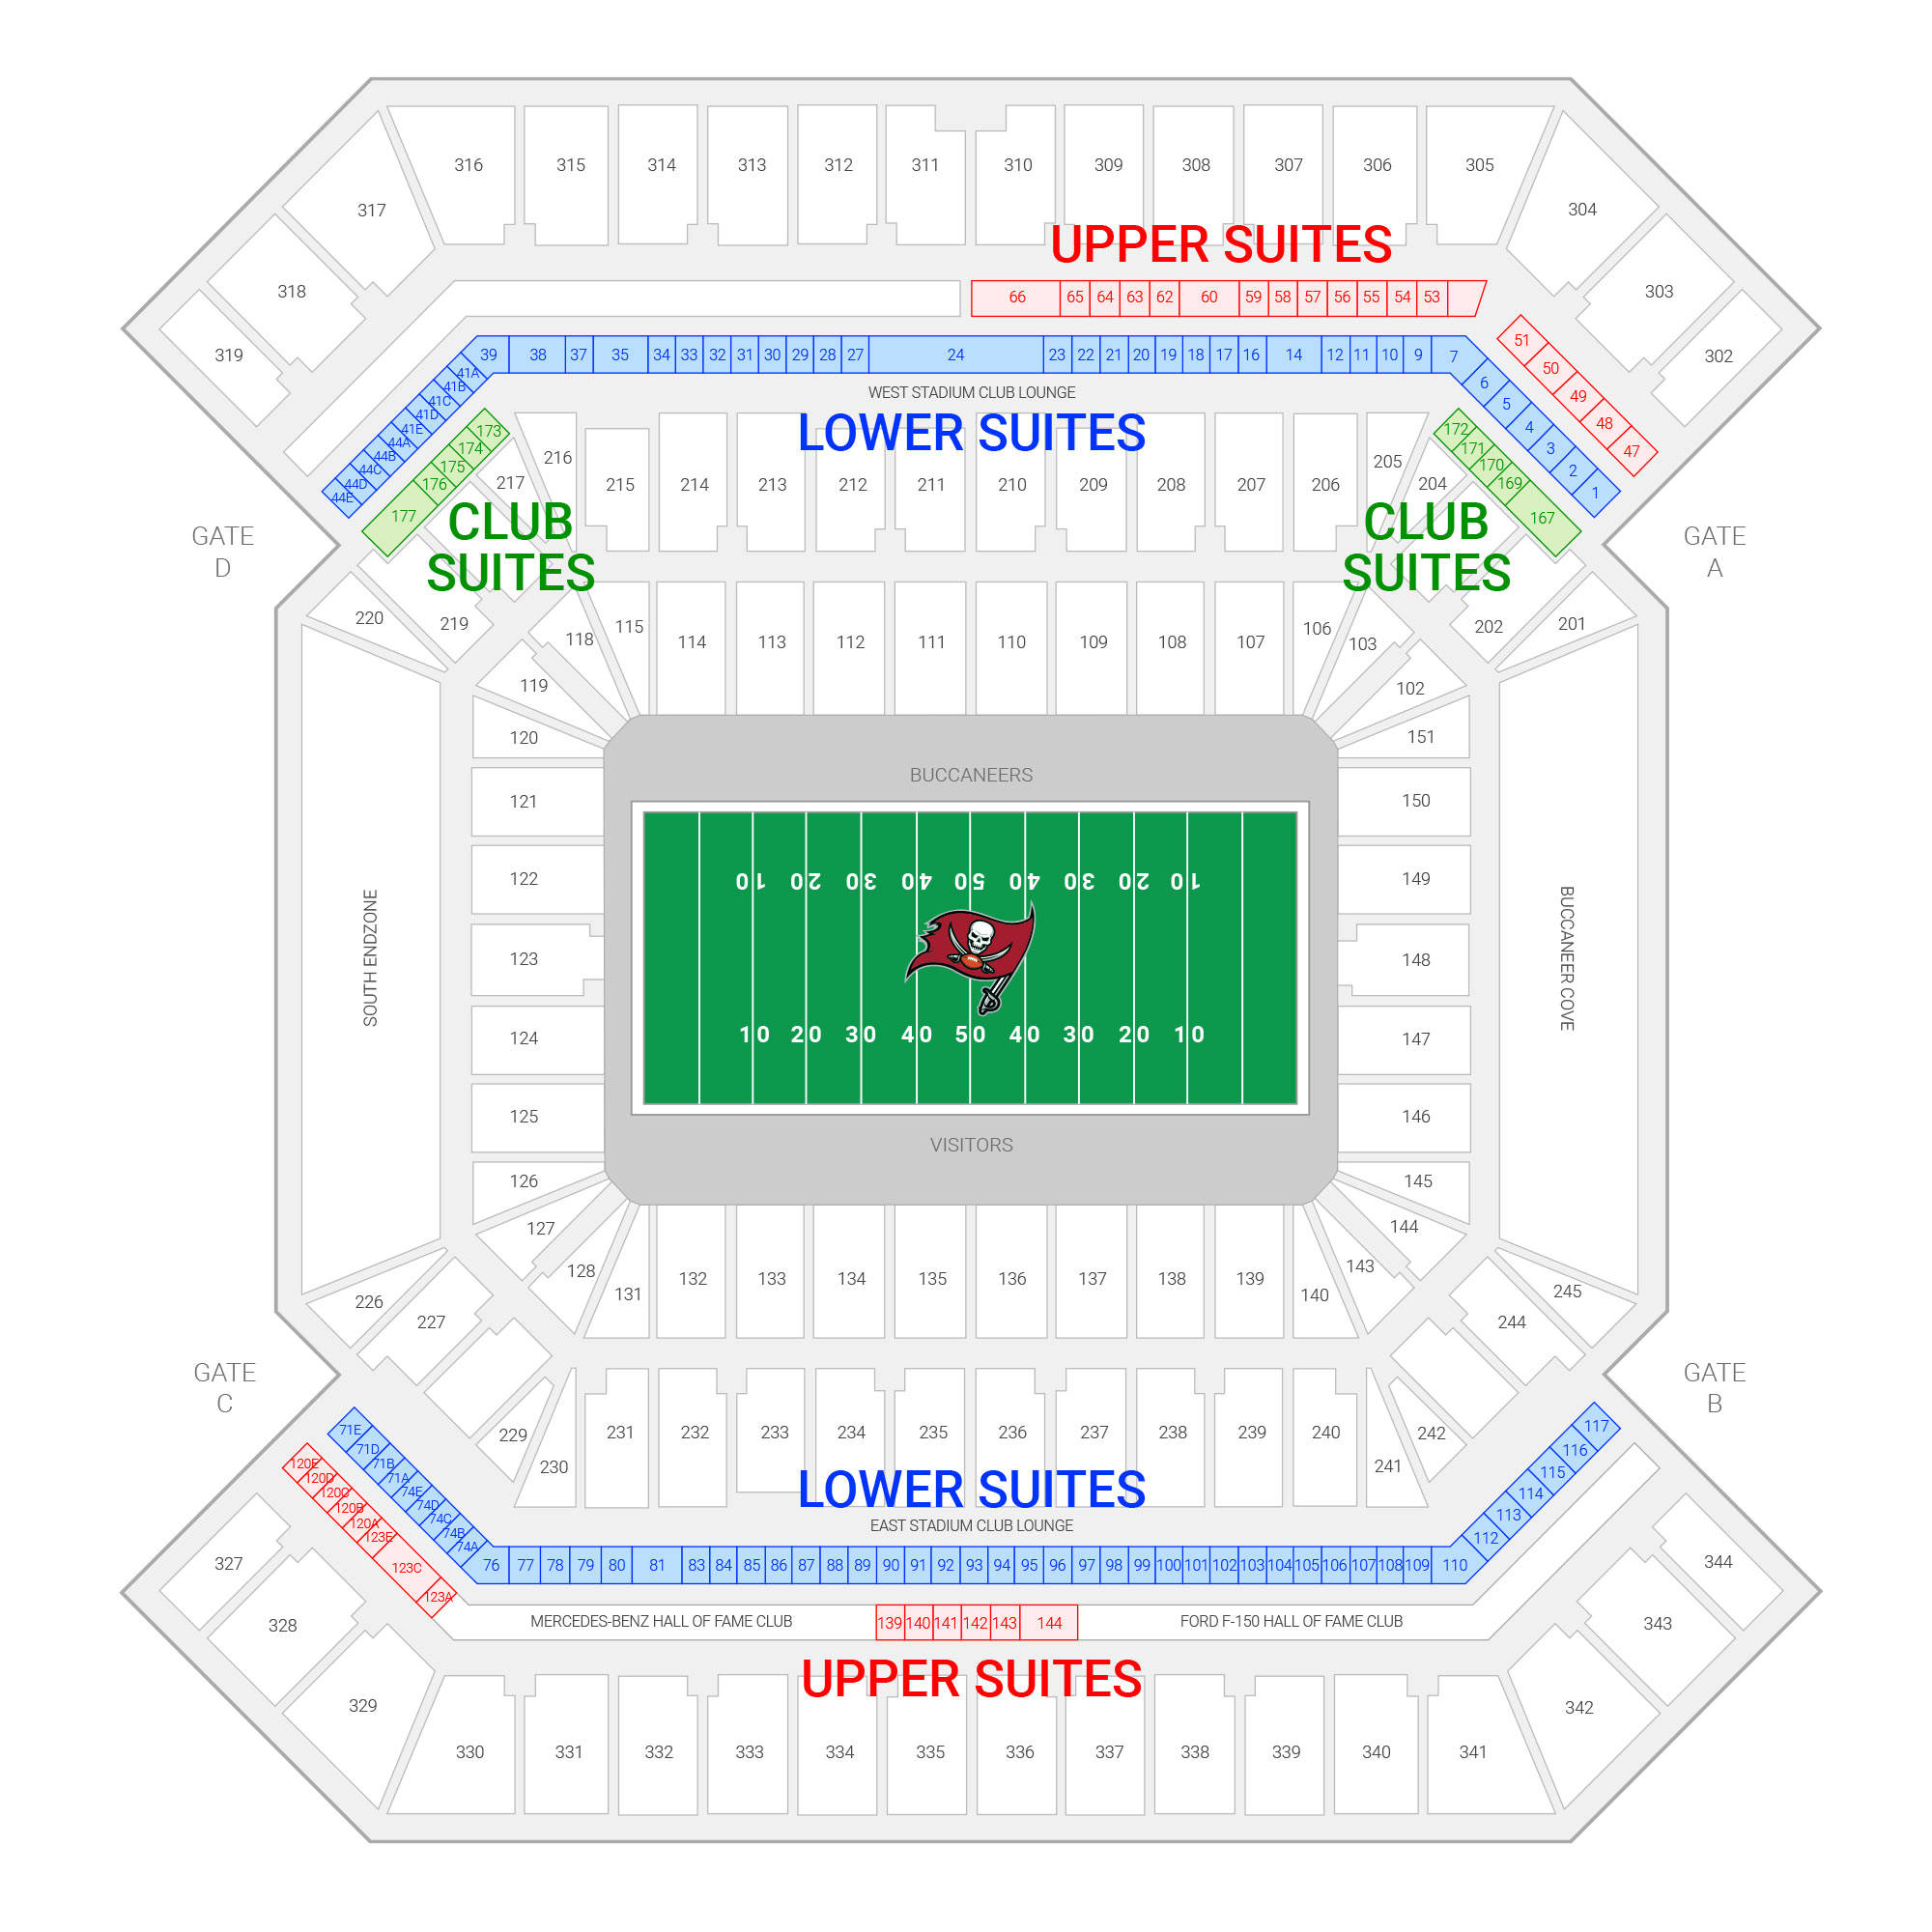 Raymond James Stadium / Tampa Bay Buccaneers Suite Map and Seating Chart